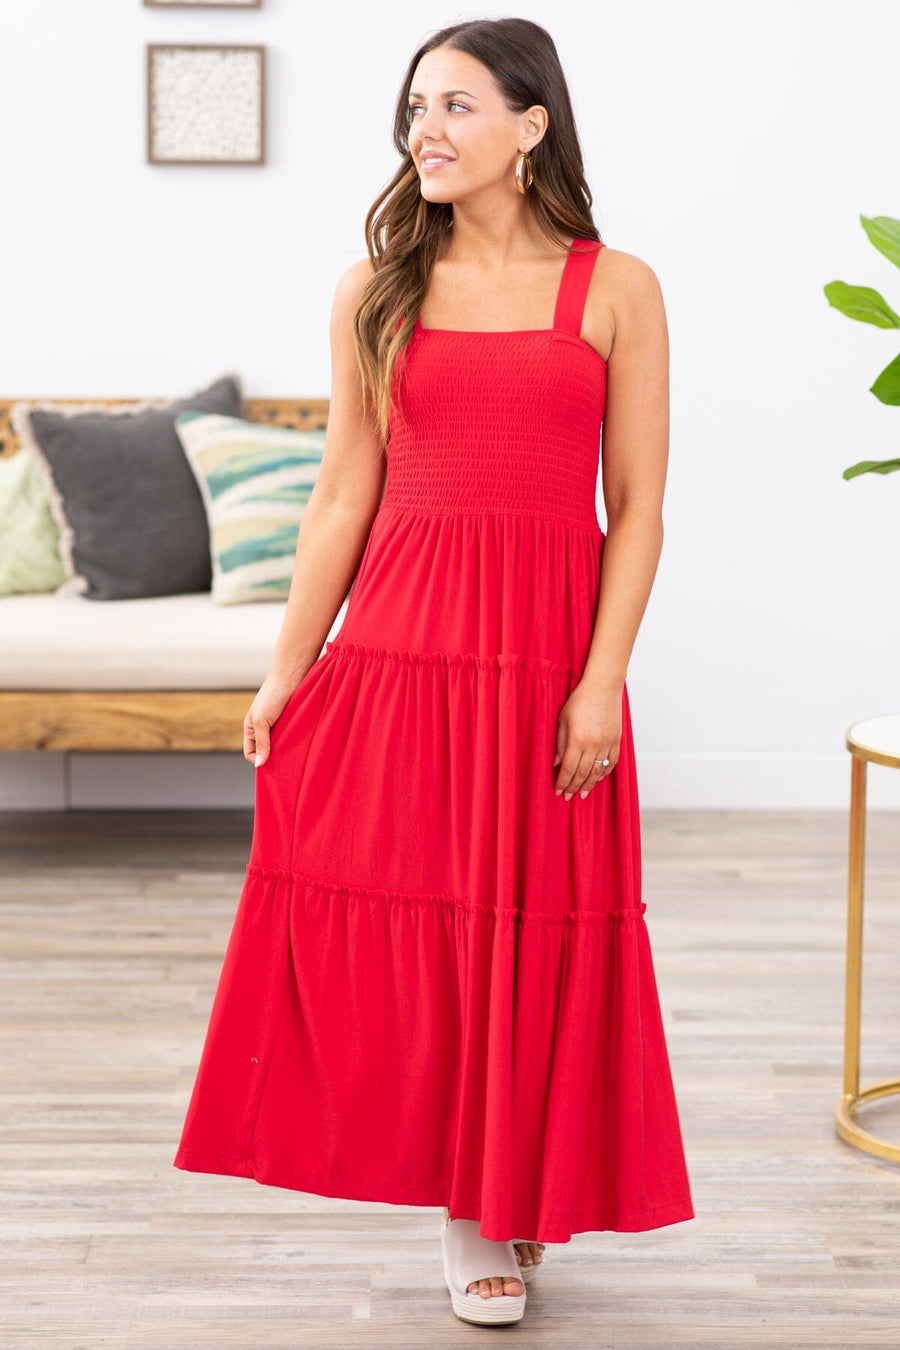 Red Smocked Bodice Skirt Tiered Midi Dress - Filly Flair